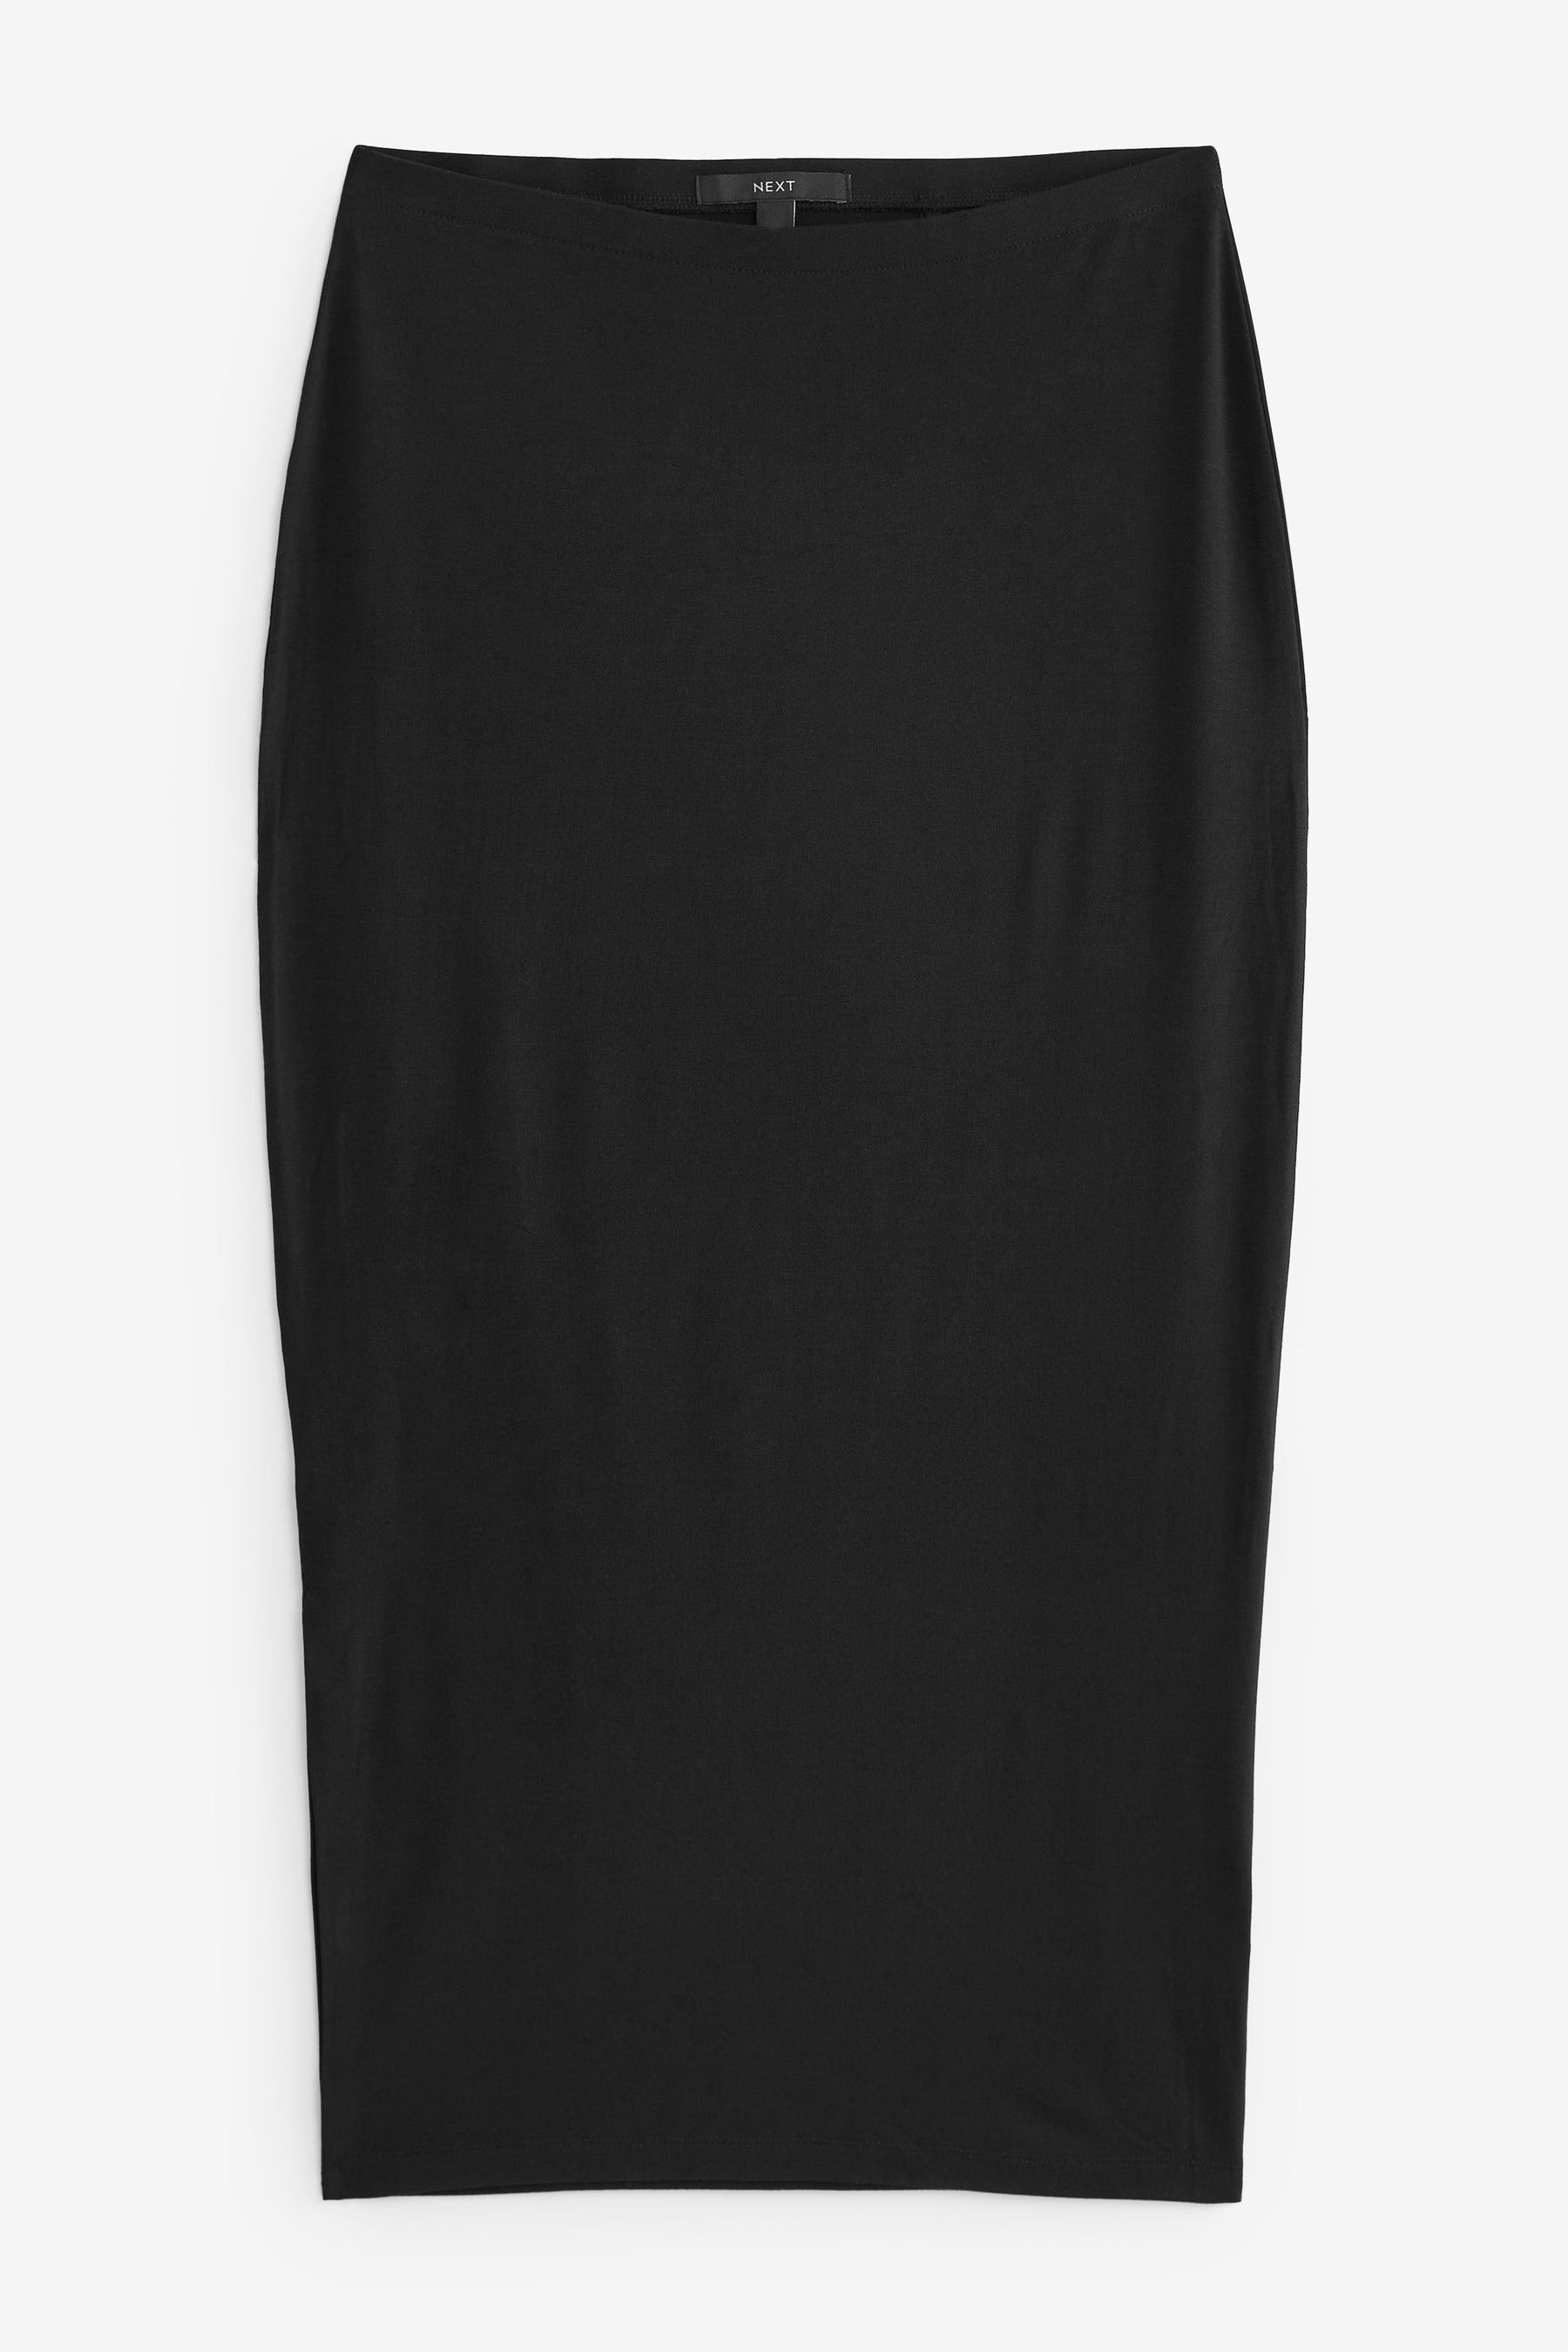 Buy Jersey Midi Skirt from the Next UK online shop